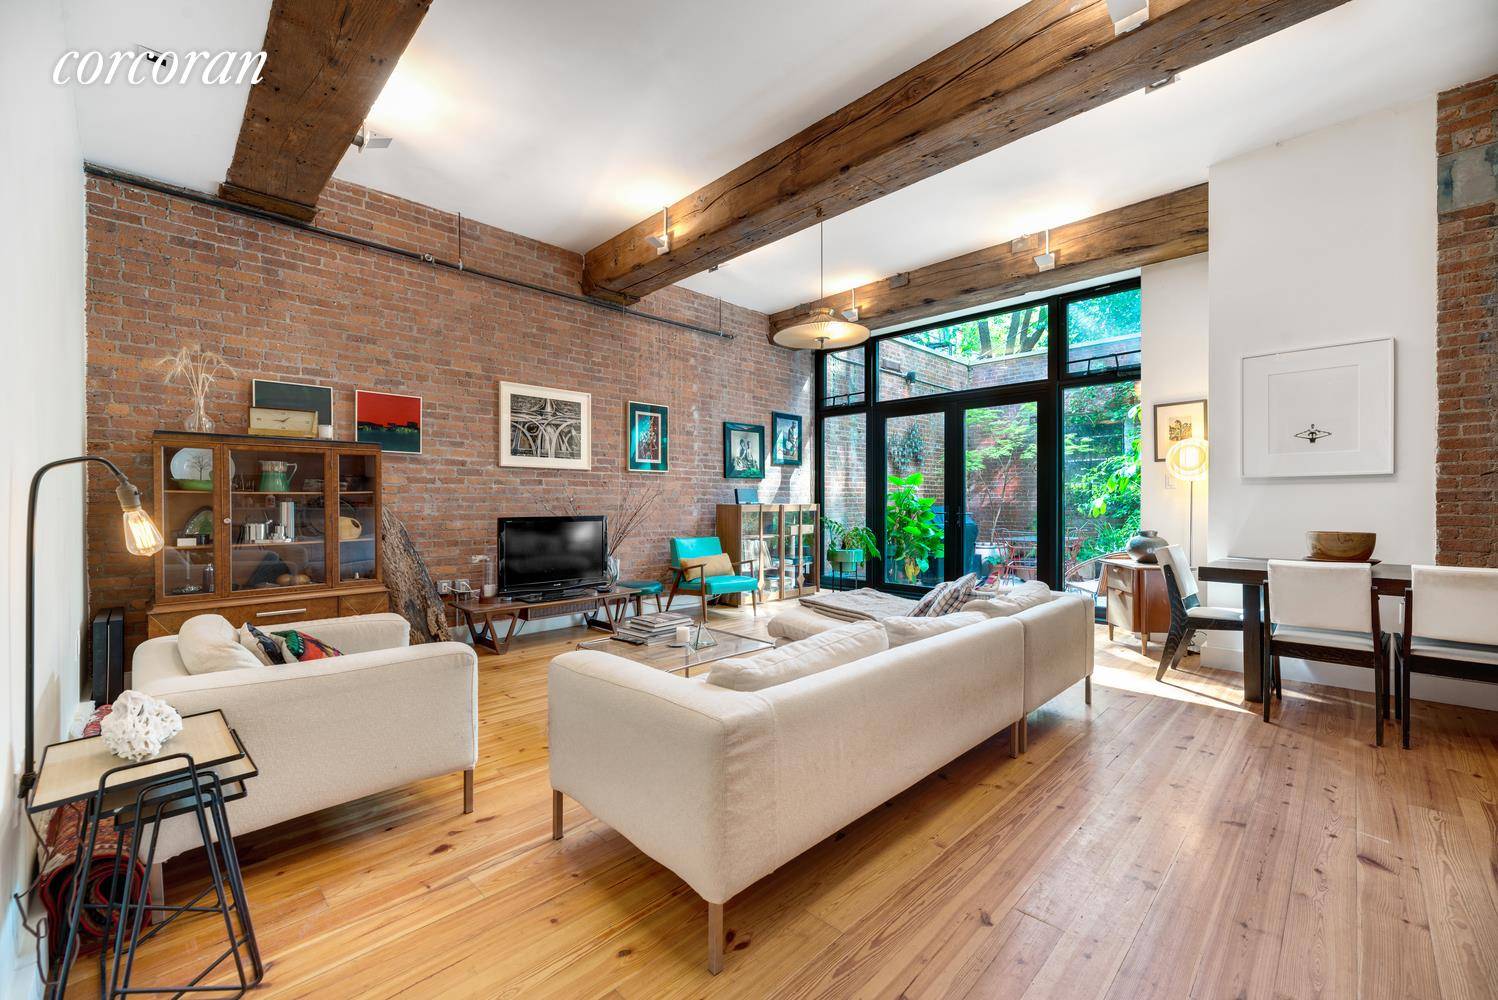 Rarely available condo at the Mason Fisk loft building Two Bedroom Loft with Secluded Garden Patio Welcome to a contemporary conversion of a true industrial loft.